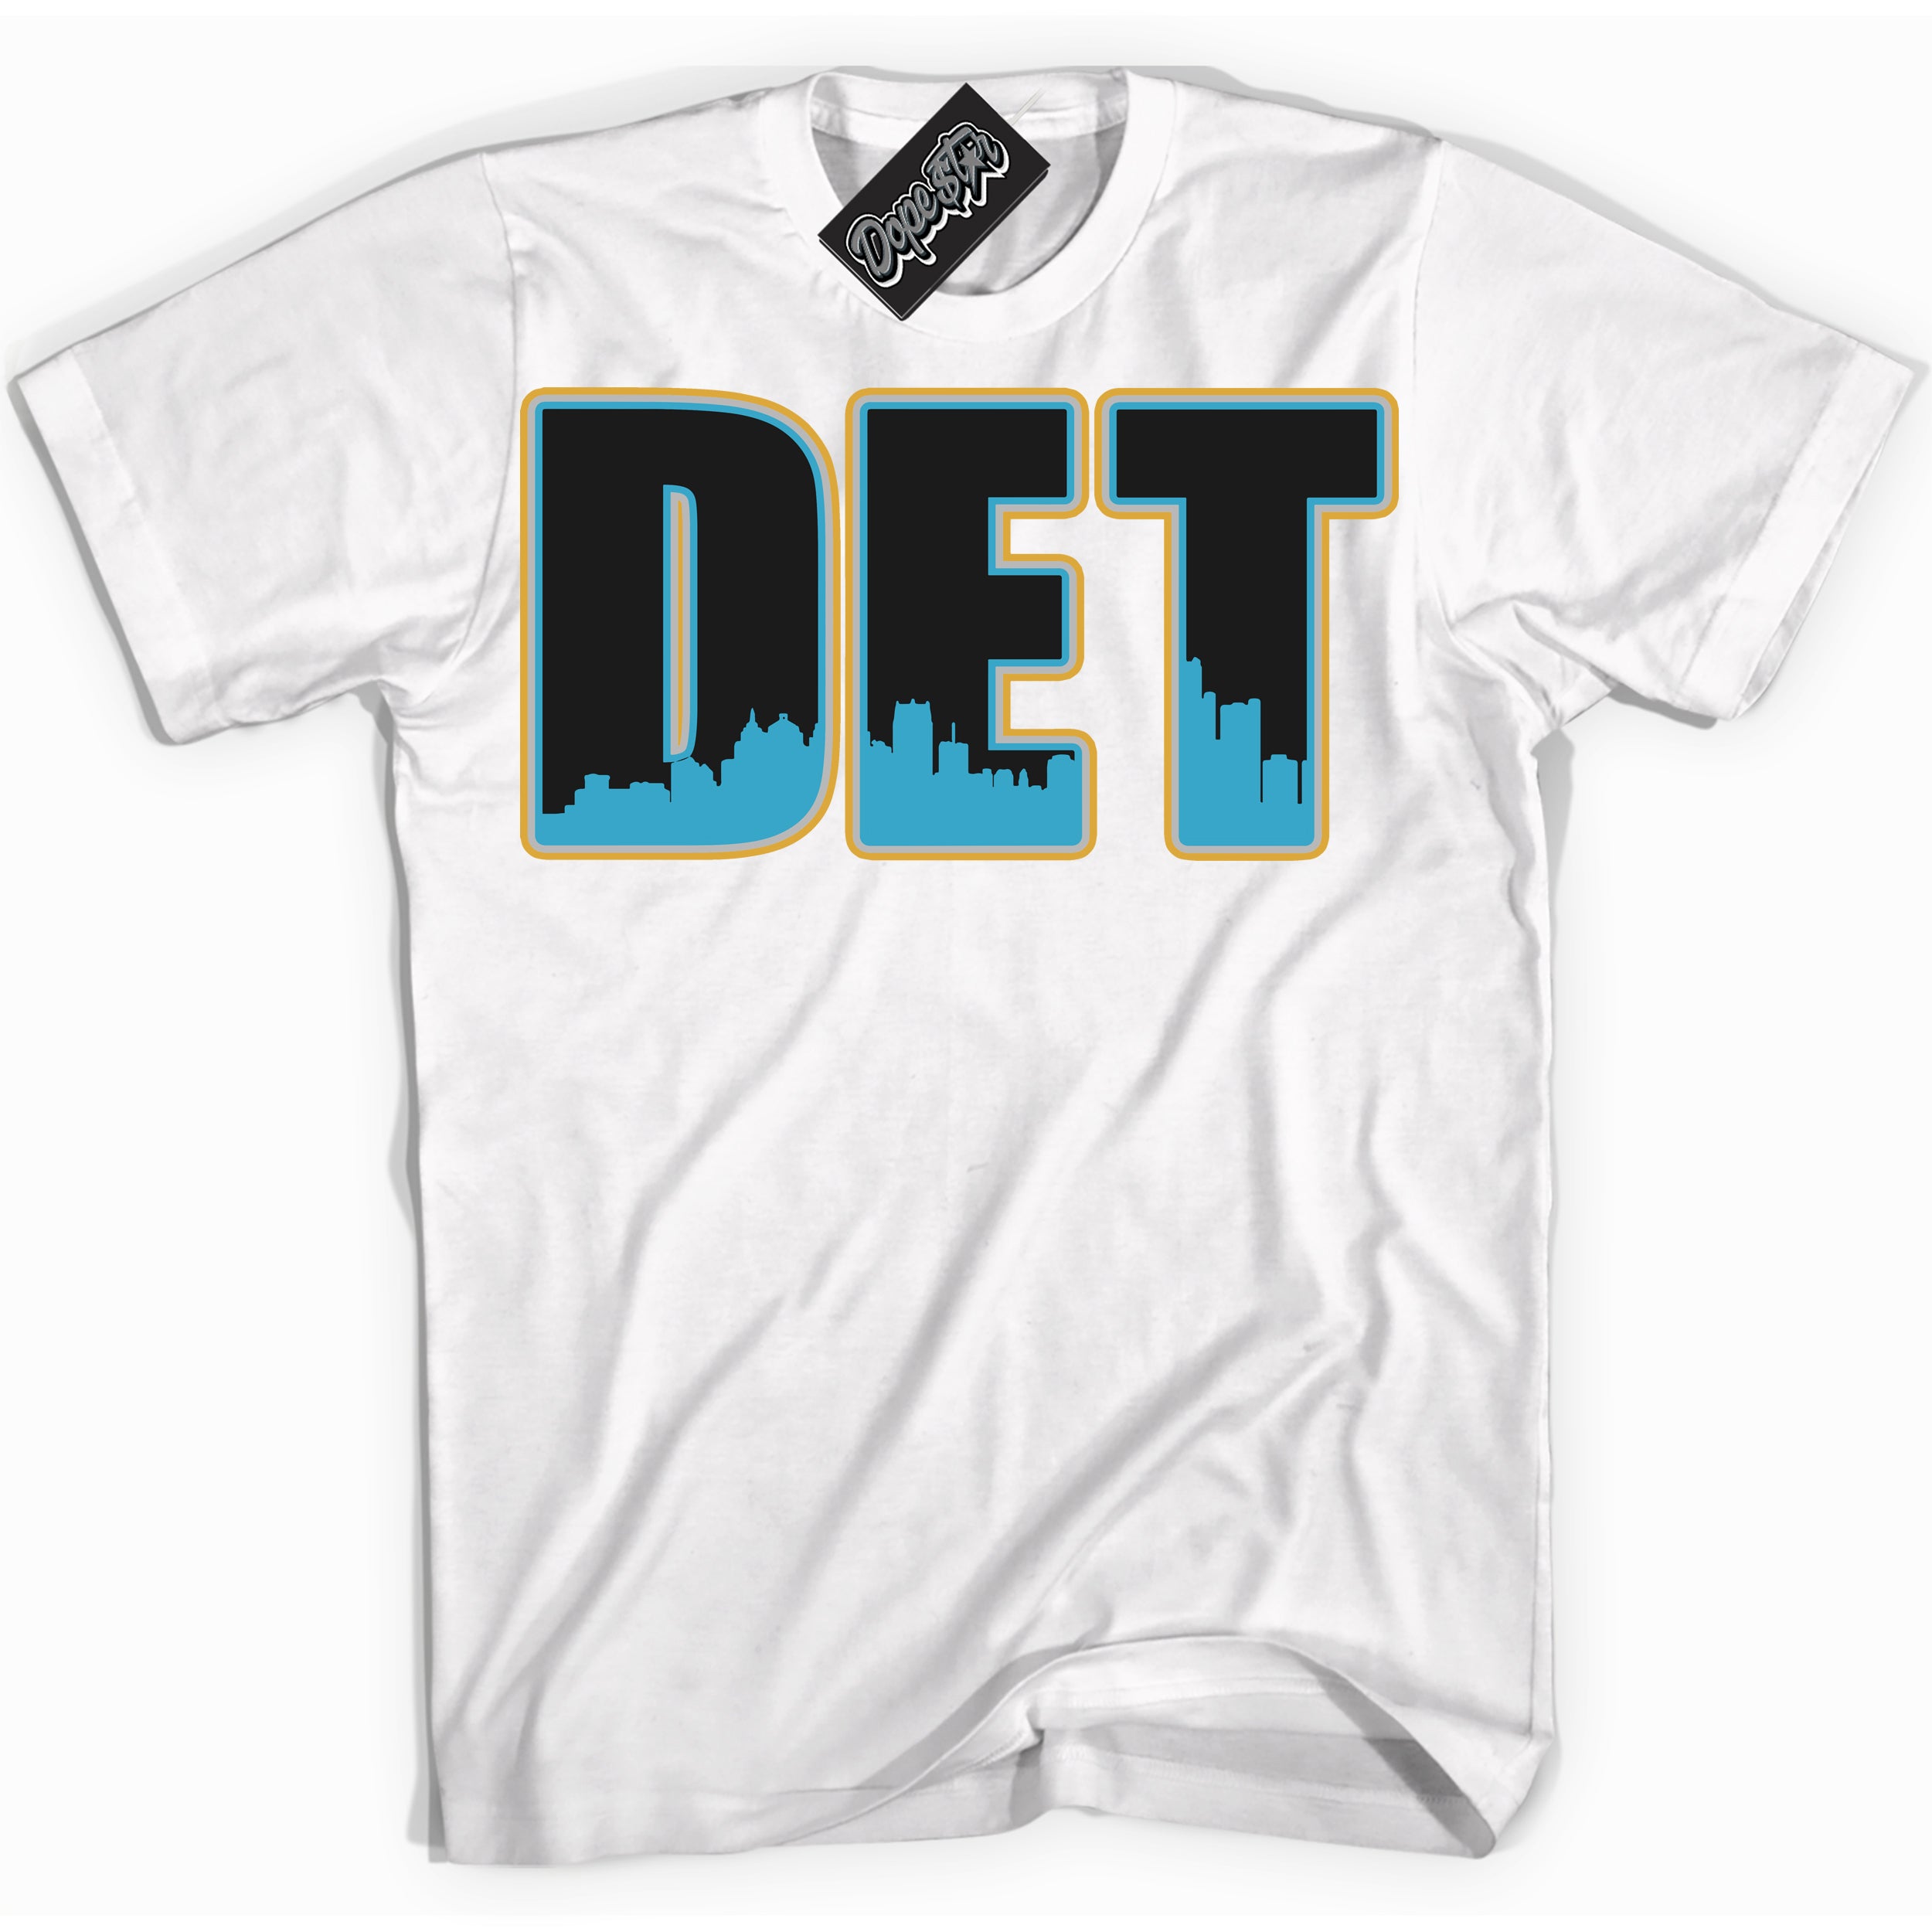 Cool White Shirt with “ Detroit” design that perfectly matches Aqua 5s Sneakers.